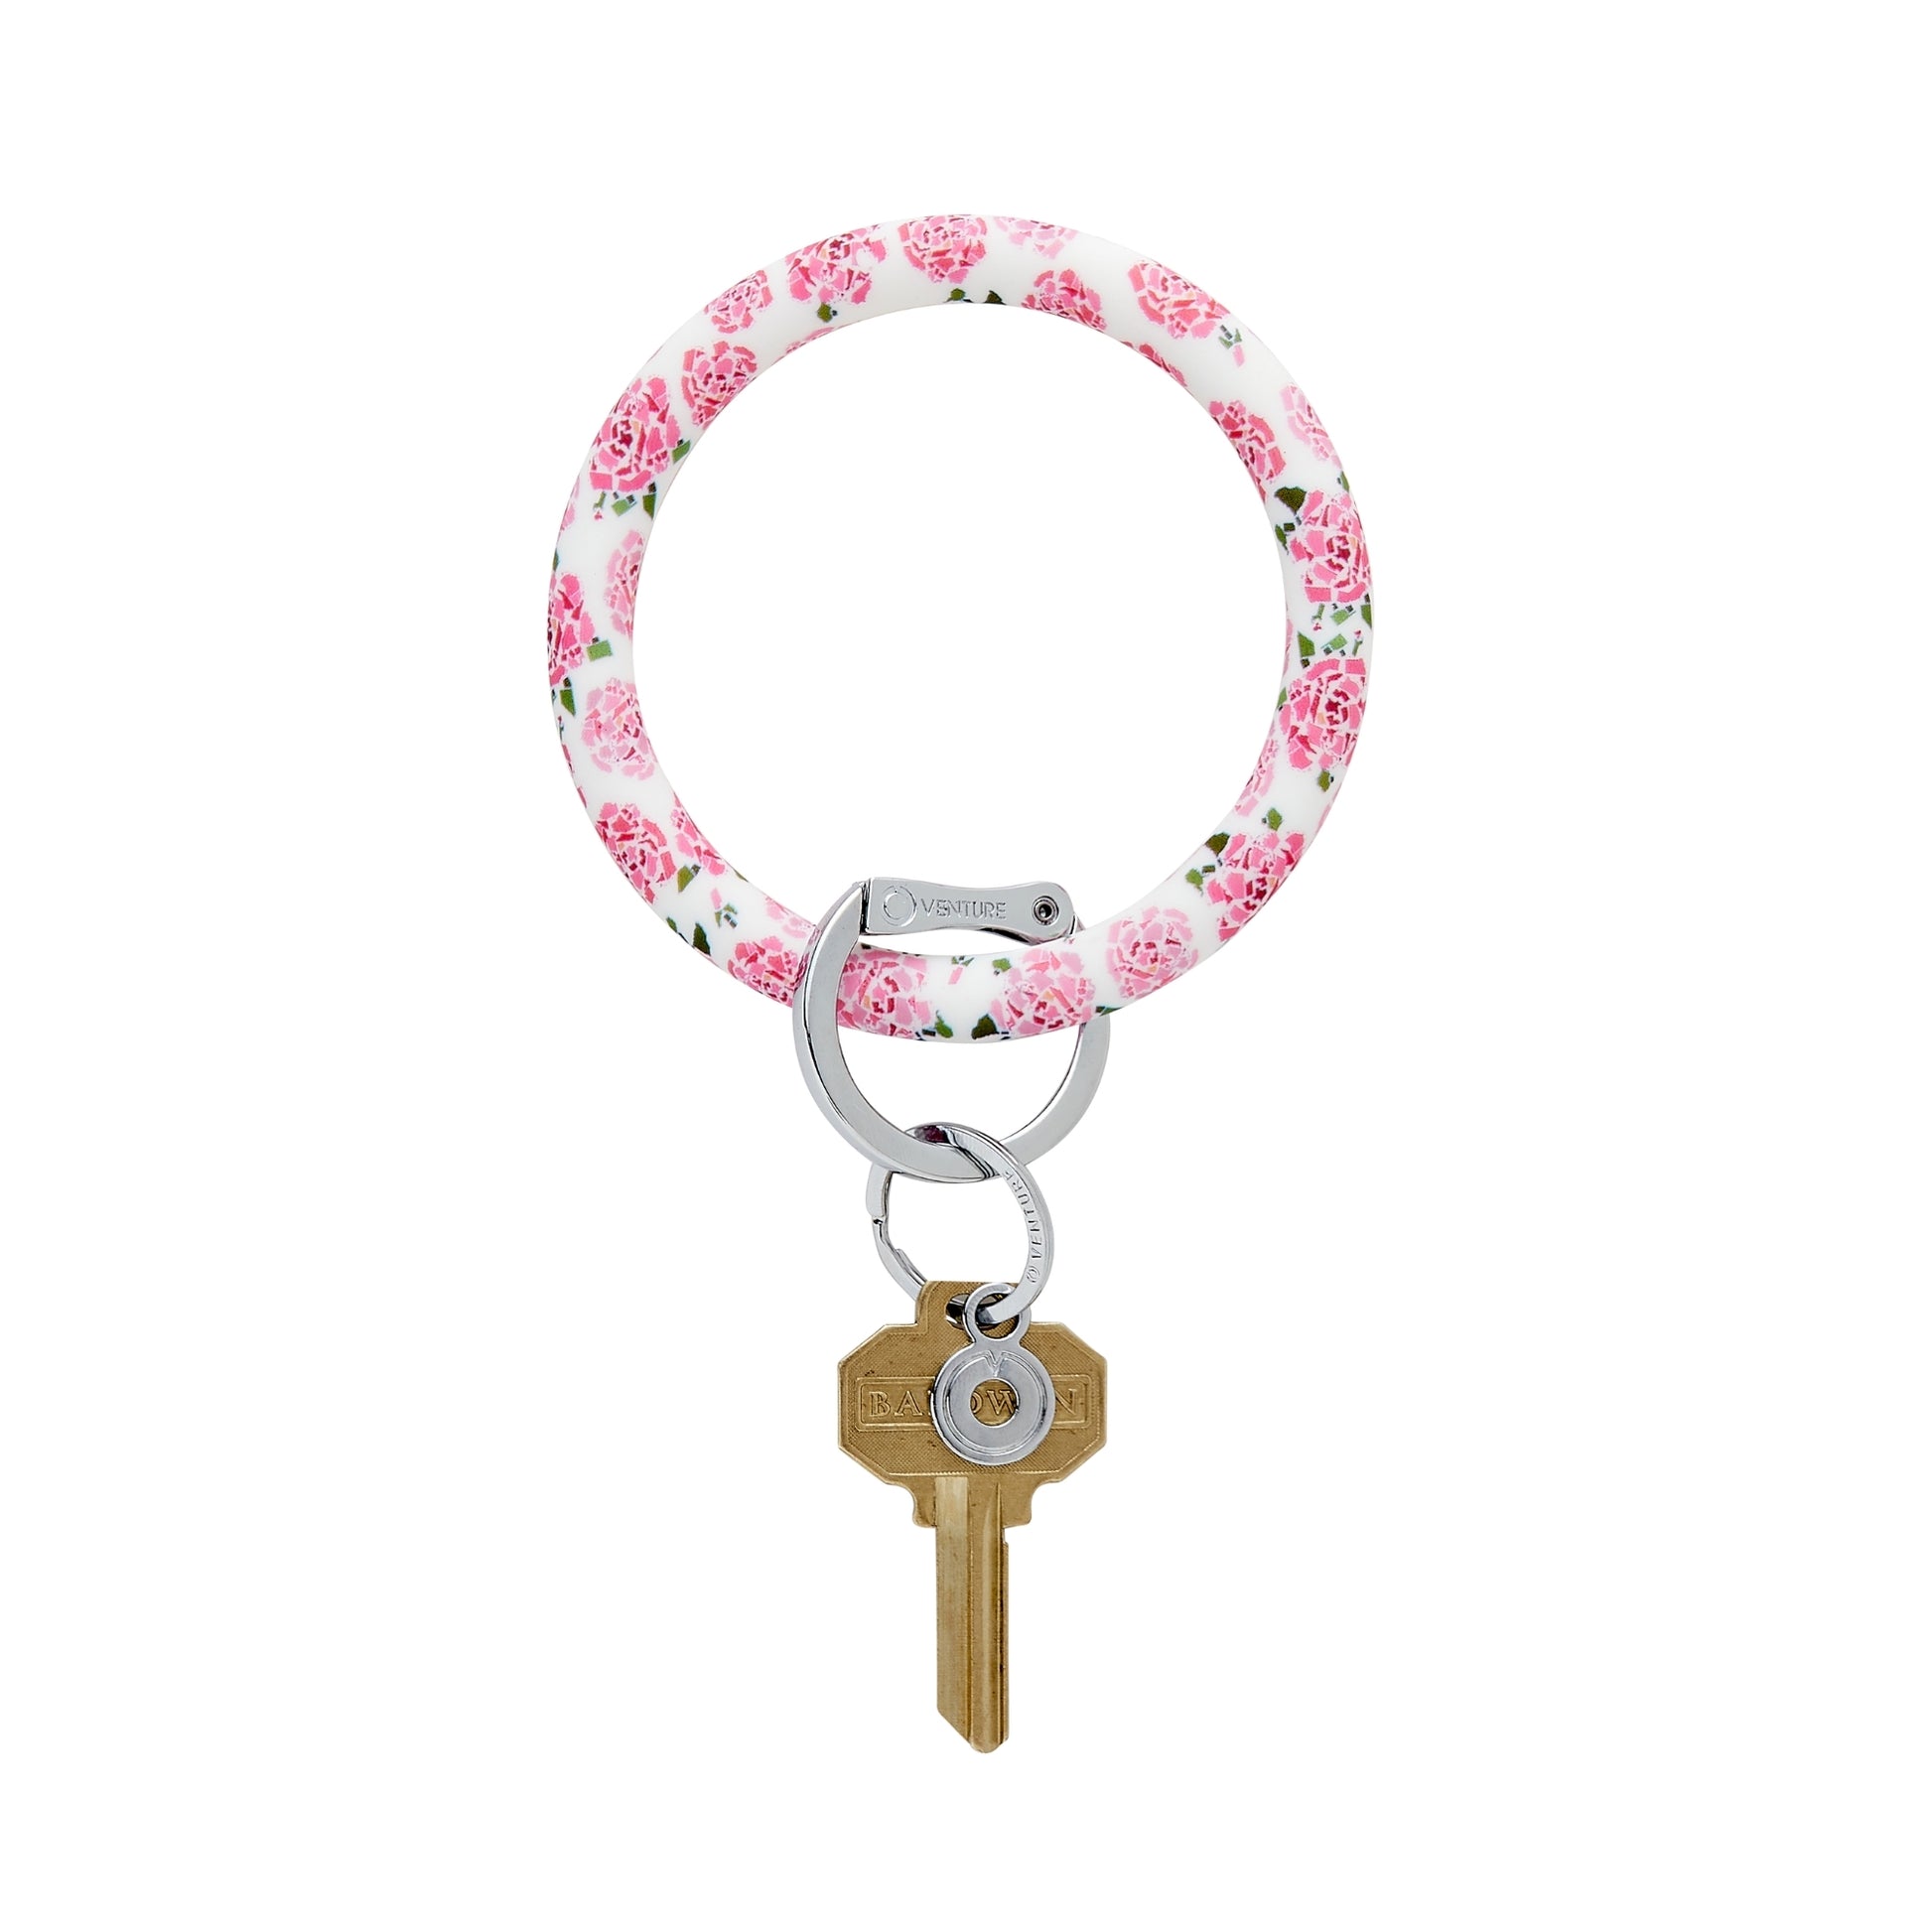 Big O Keyring in Fifty States Print. The pink peonies are made up of fifty states shapes in various colors of pink.